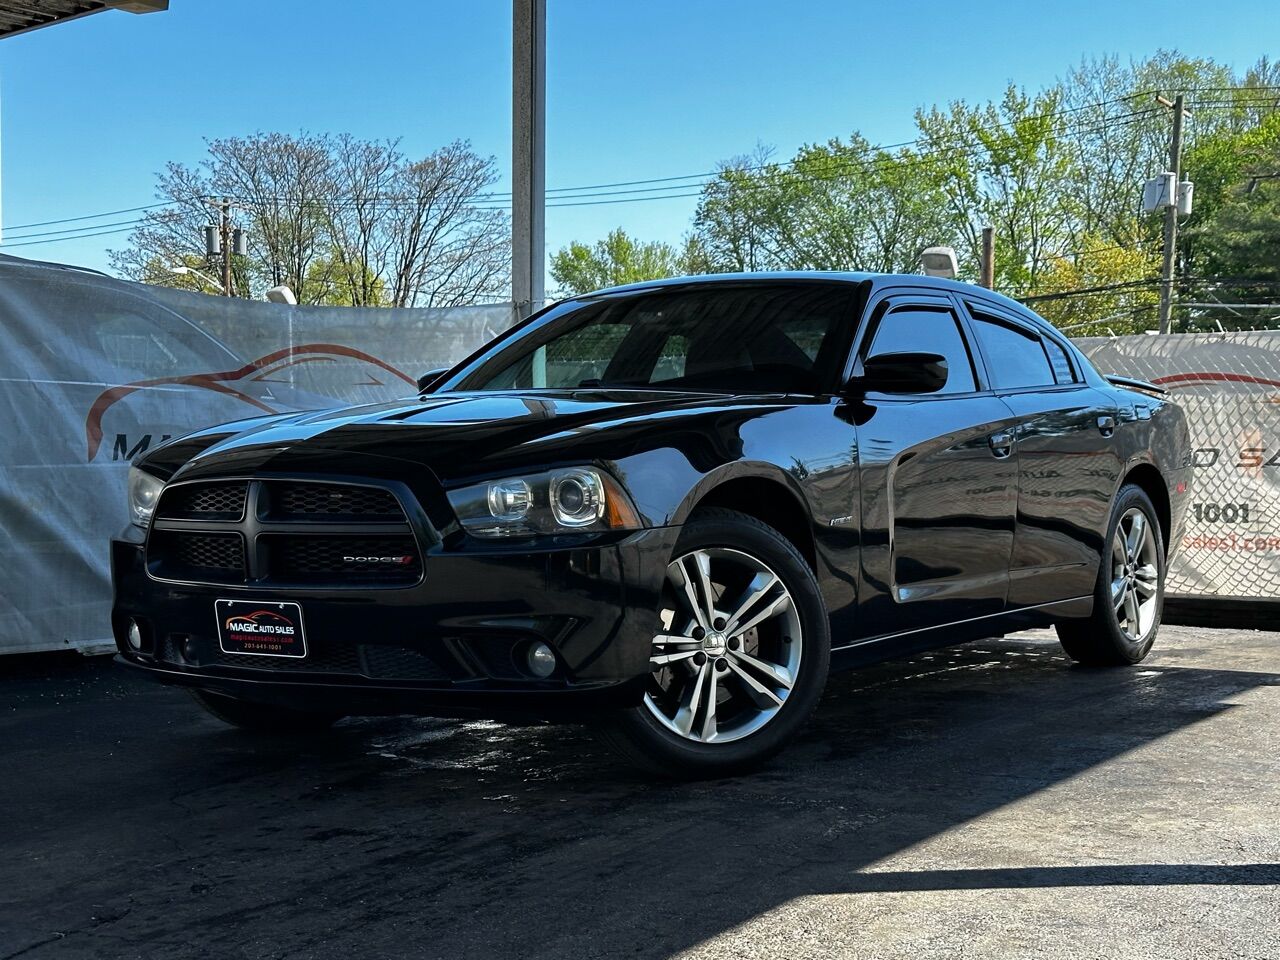 2013 Dodge Charger R/T AWD